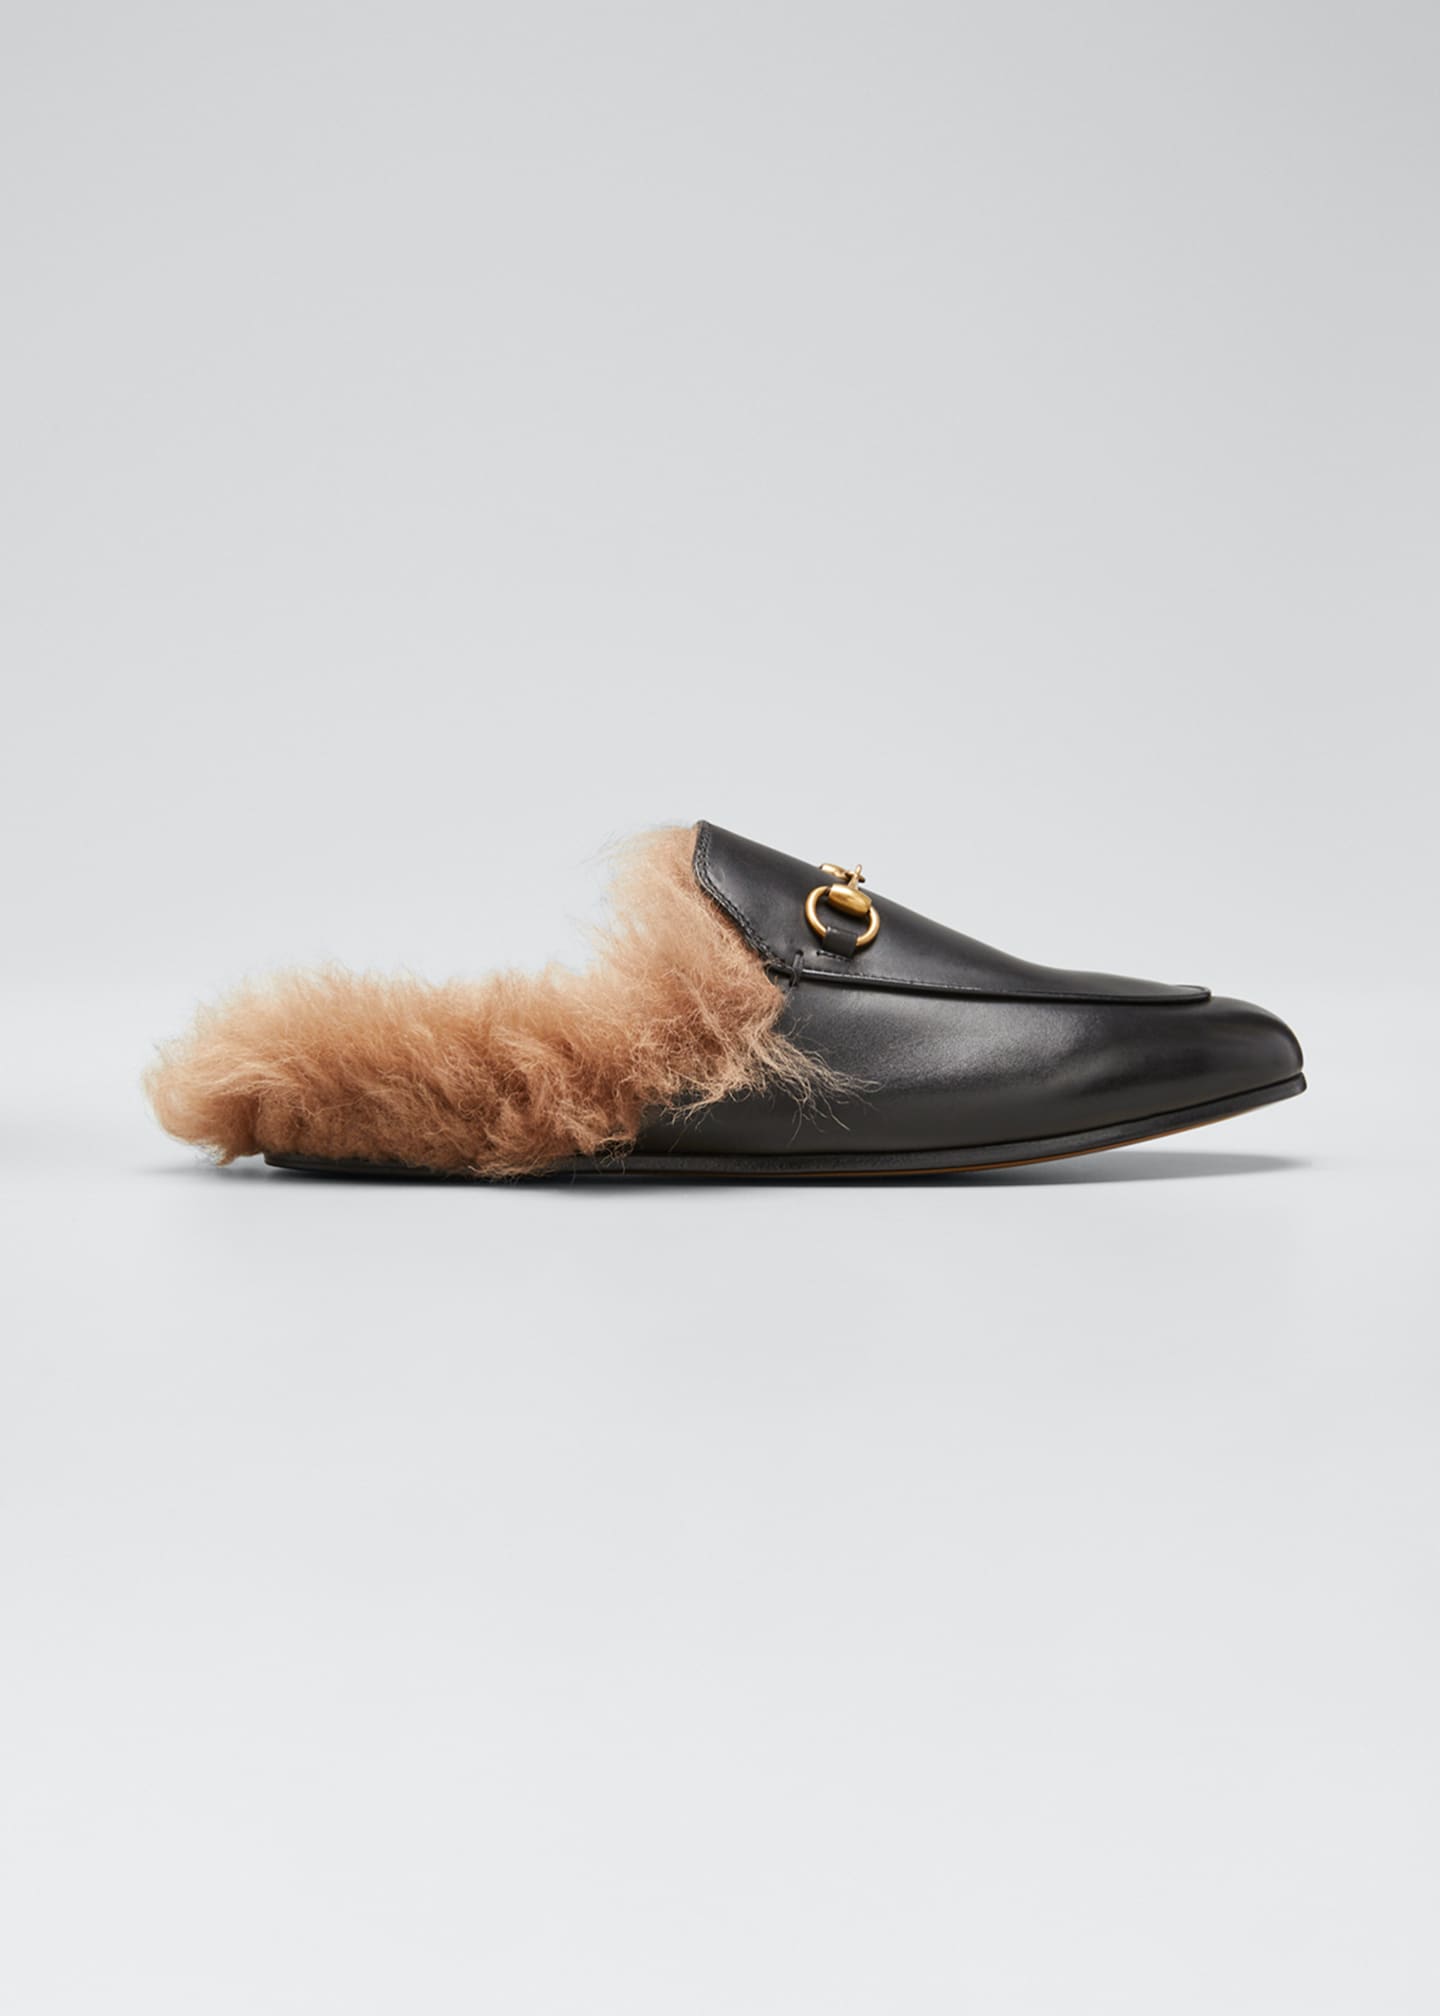 Gucci Princetown Fur Lined Mule Image 1 of 5